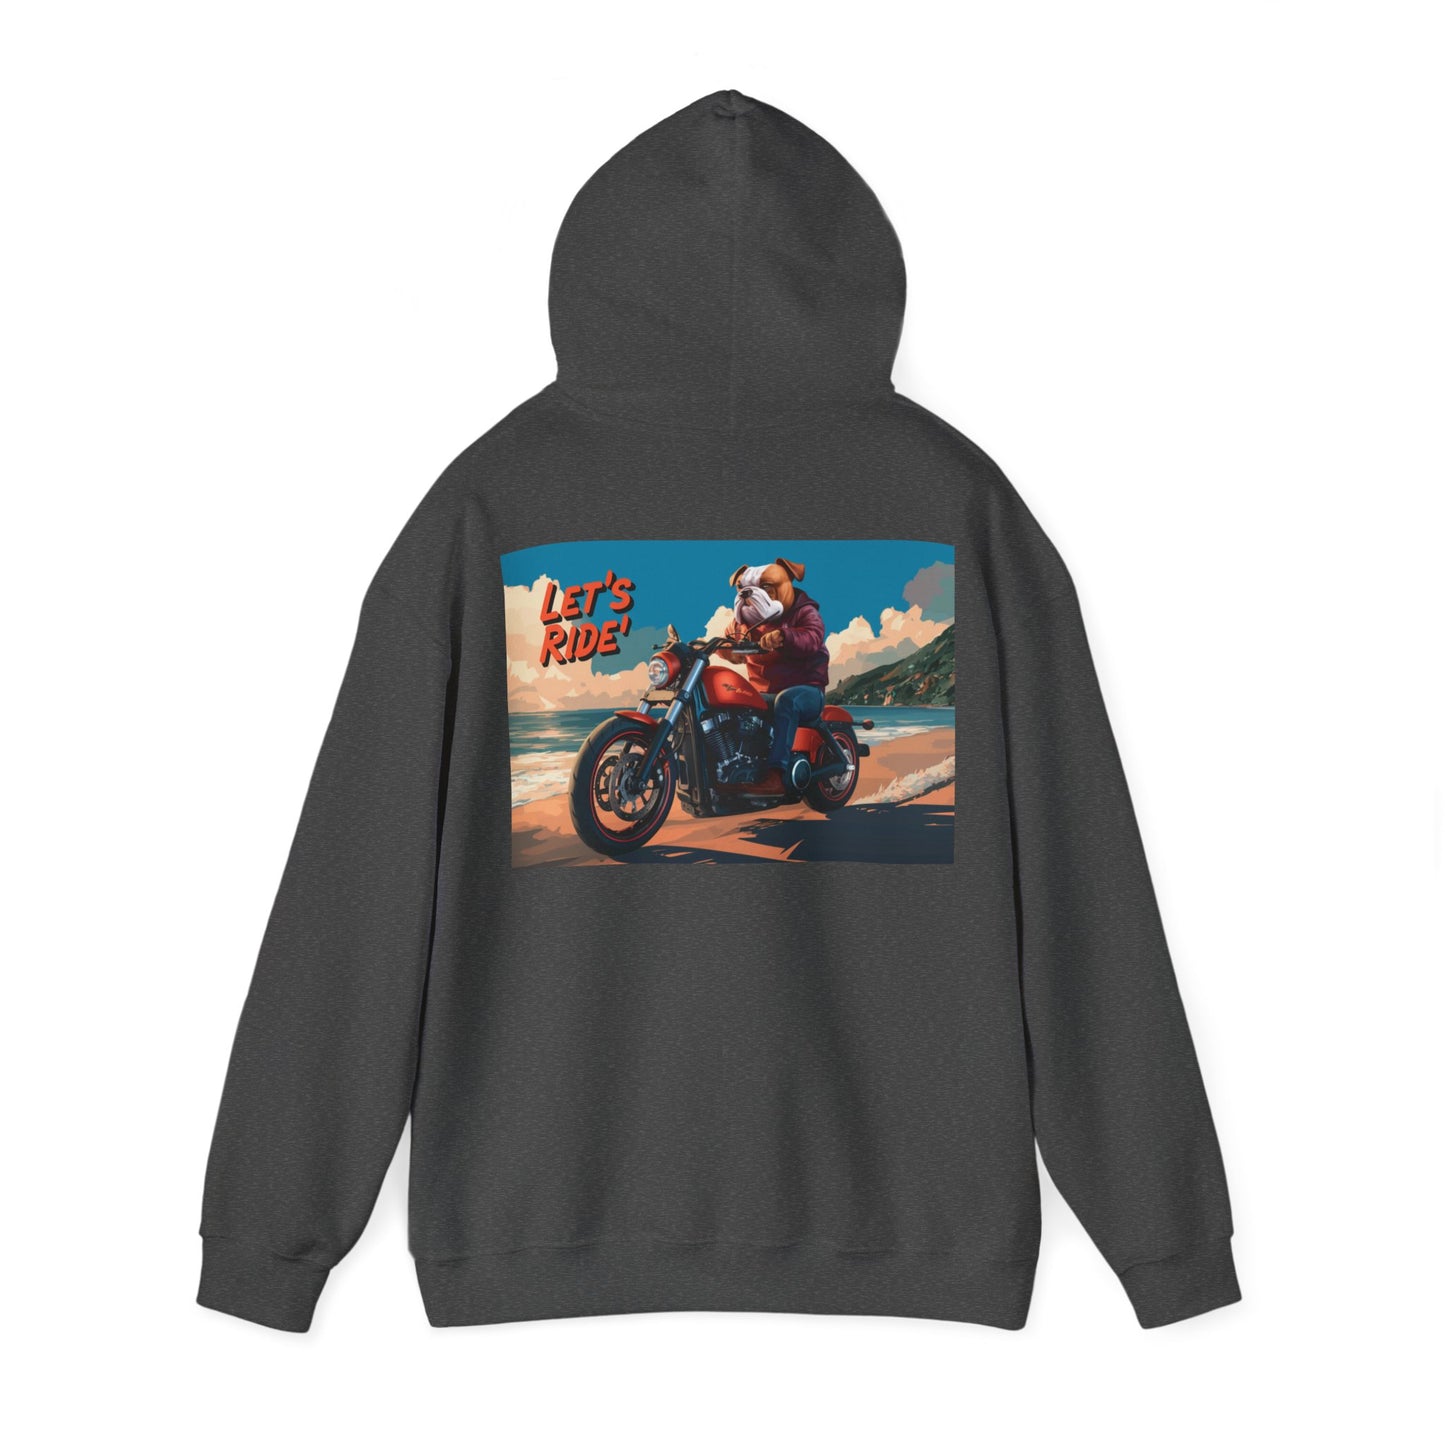 Let's Ride, Bulldog Riding Motorcycle on Beach - Hoodie